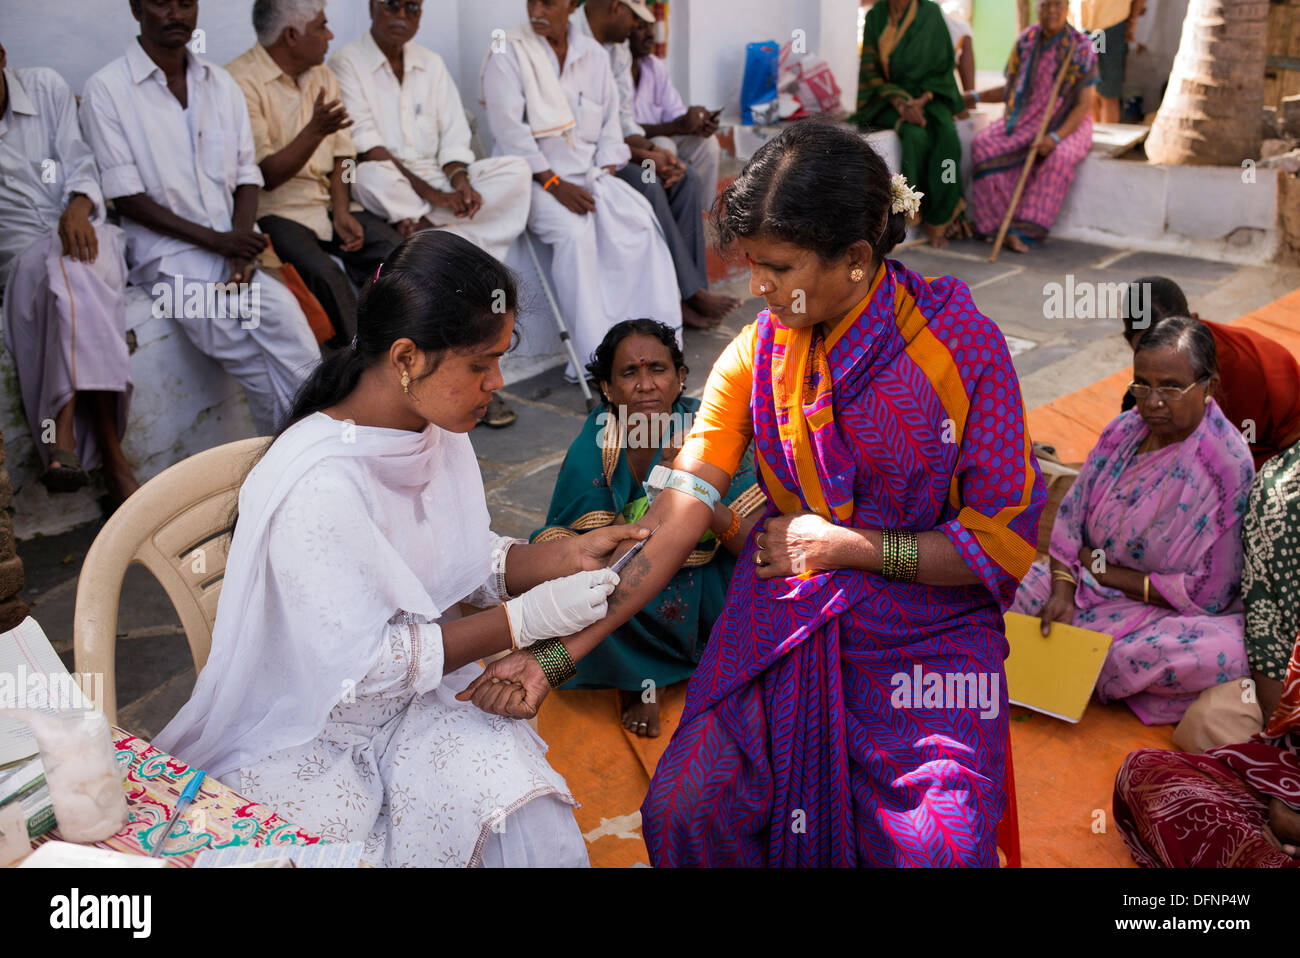 Indian nurse taking blood samples from patients at Sri Sathya Sai Baba mobile outreach hospital clinic. Andhra Pradesh, India Stock Photo